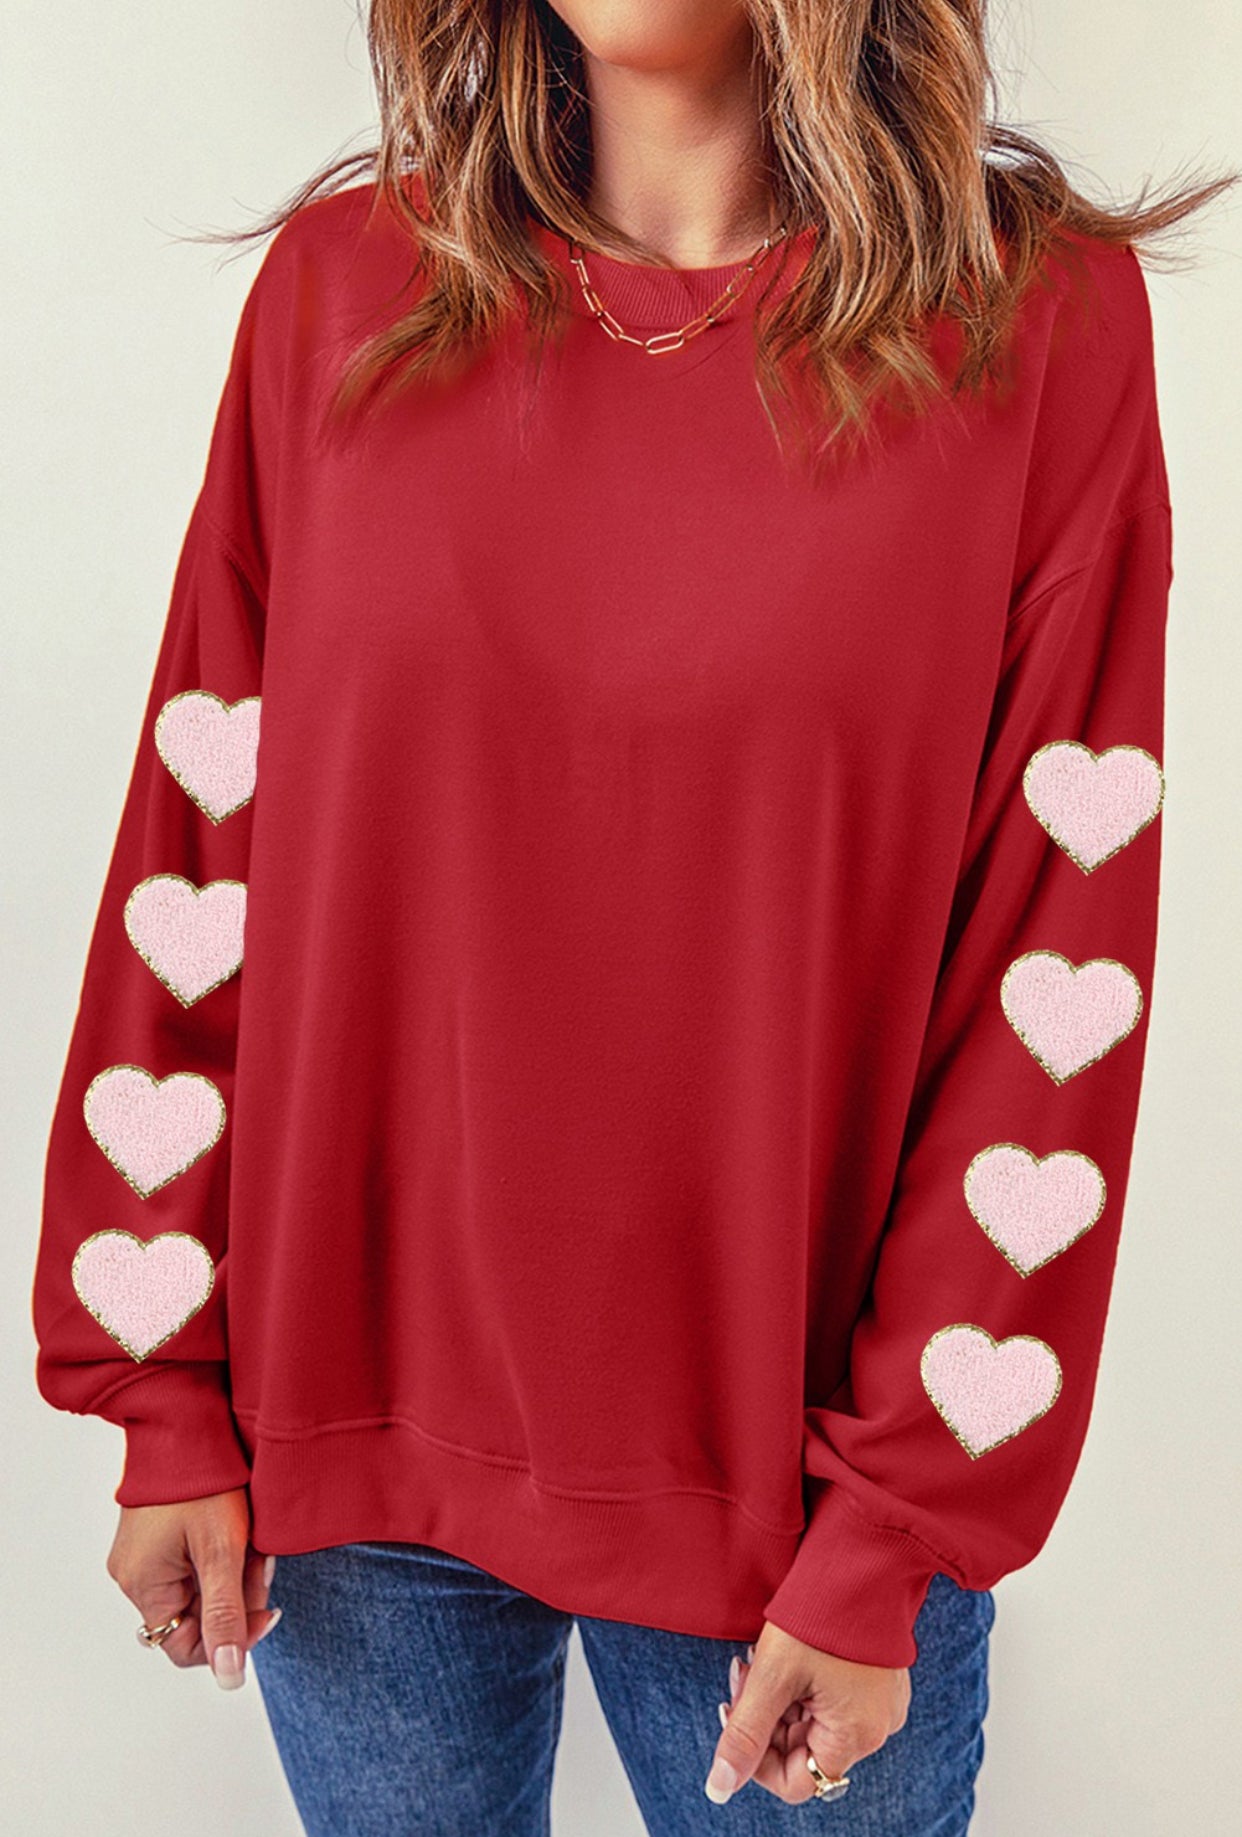 Red Heart Sleeve Chenille Embroidered Sweatshirt